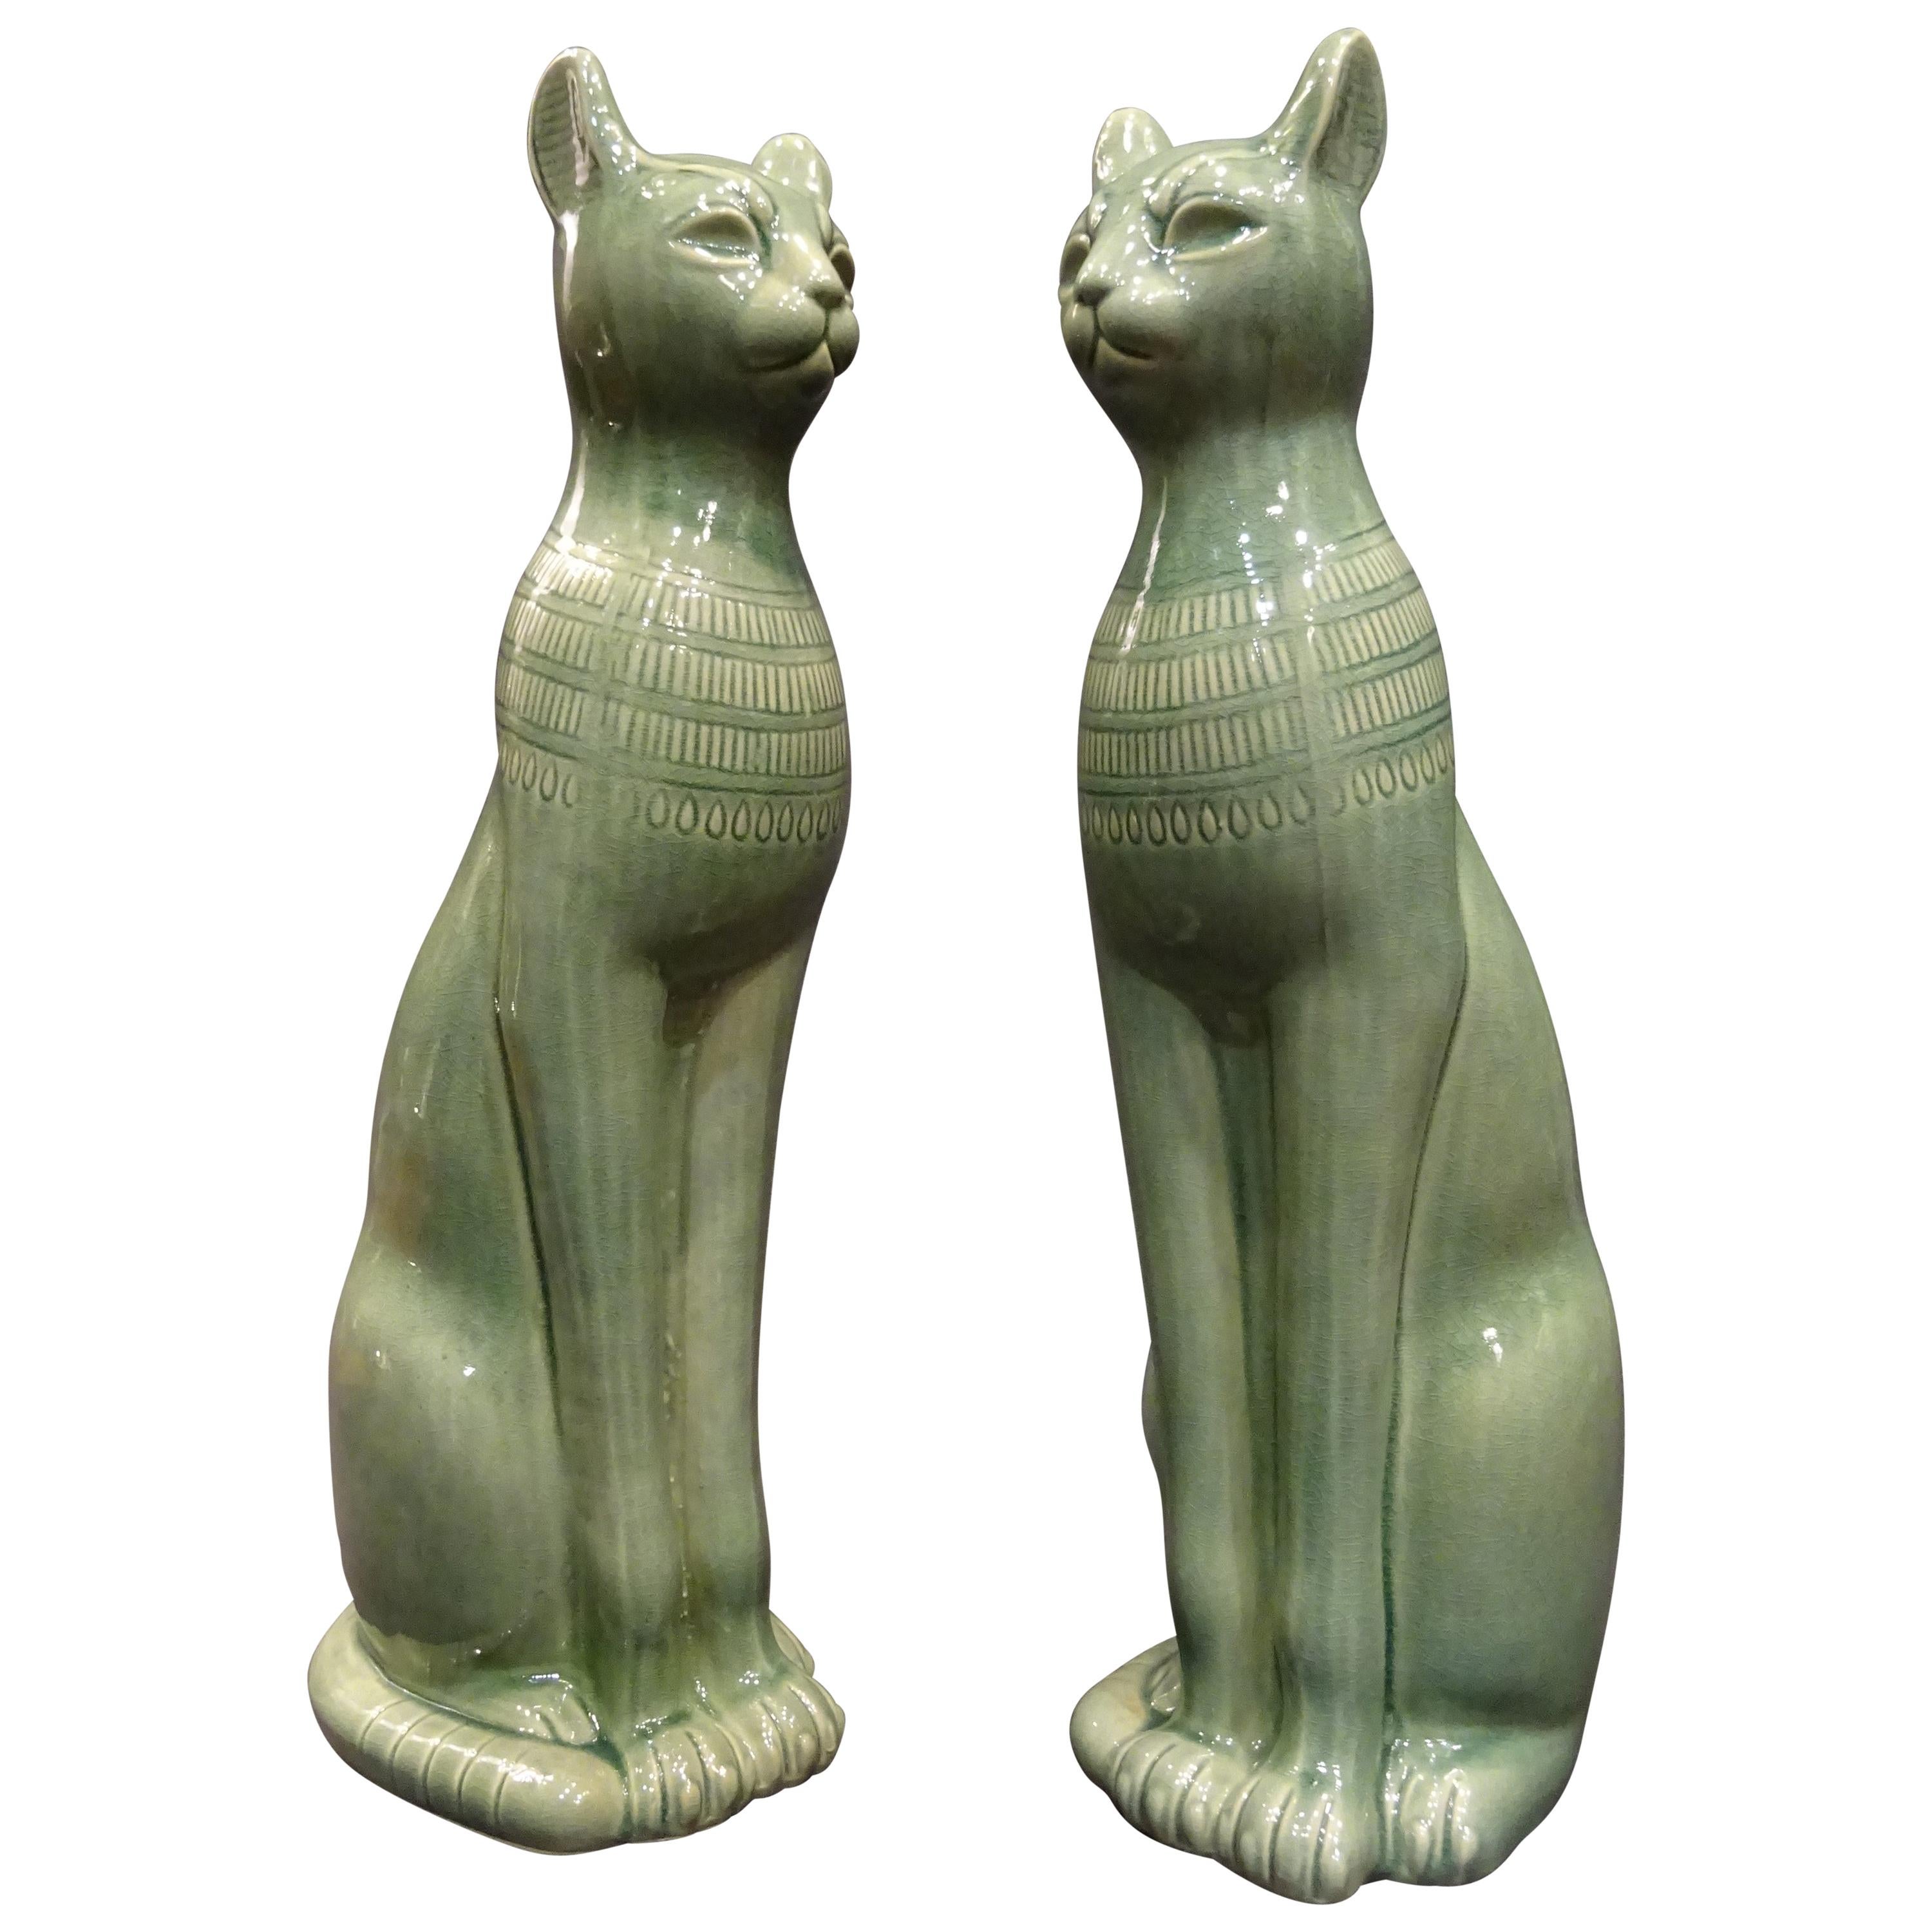 Amazing couple of Italian cats with Egyptian bearing and hieratic attitude, very refined and elegance sculptures in an extraordinary and beautiful celadon color, giving them a unique oriental touch.
They are very difficult pieces to find and very